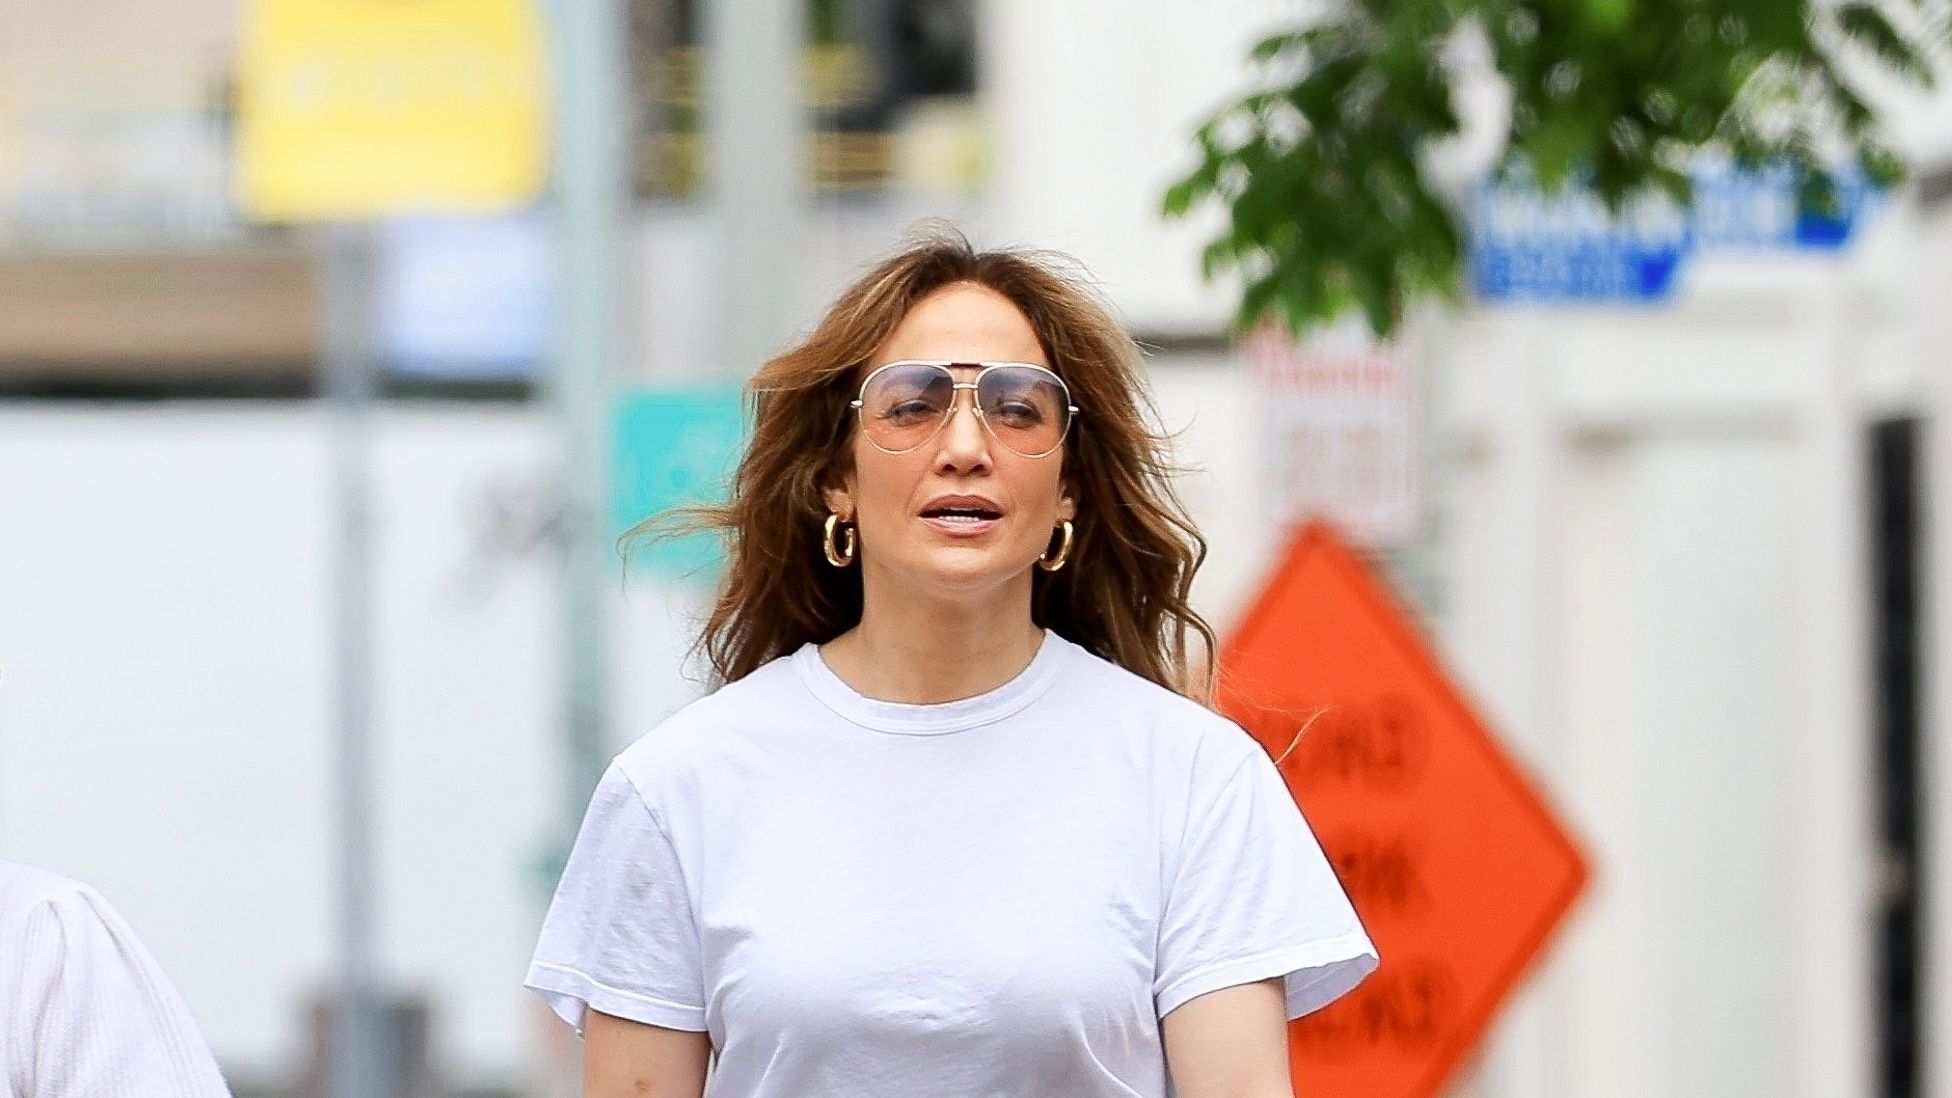 Fans Think Jennifer Lopez Gave Back a Major Birthday Gift From